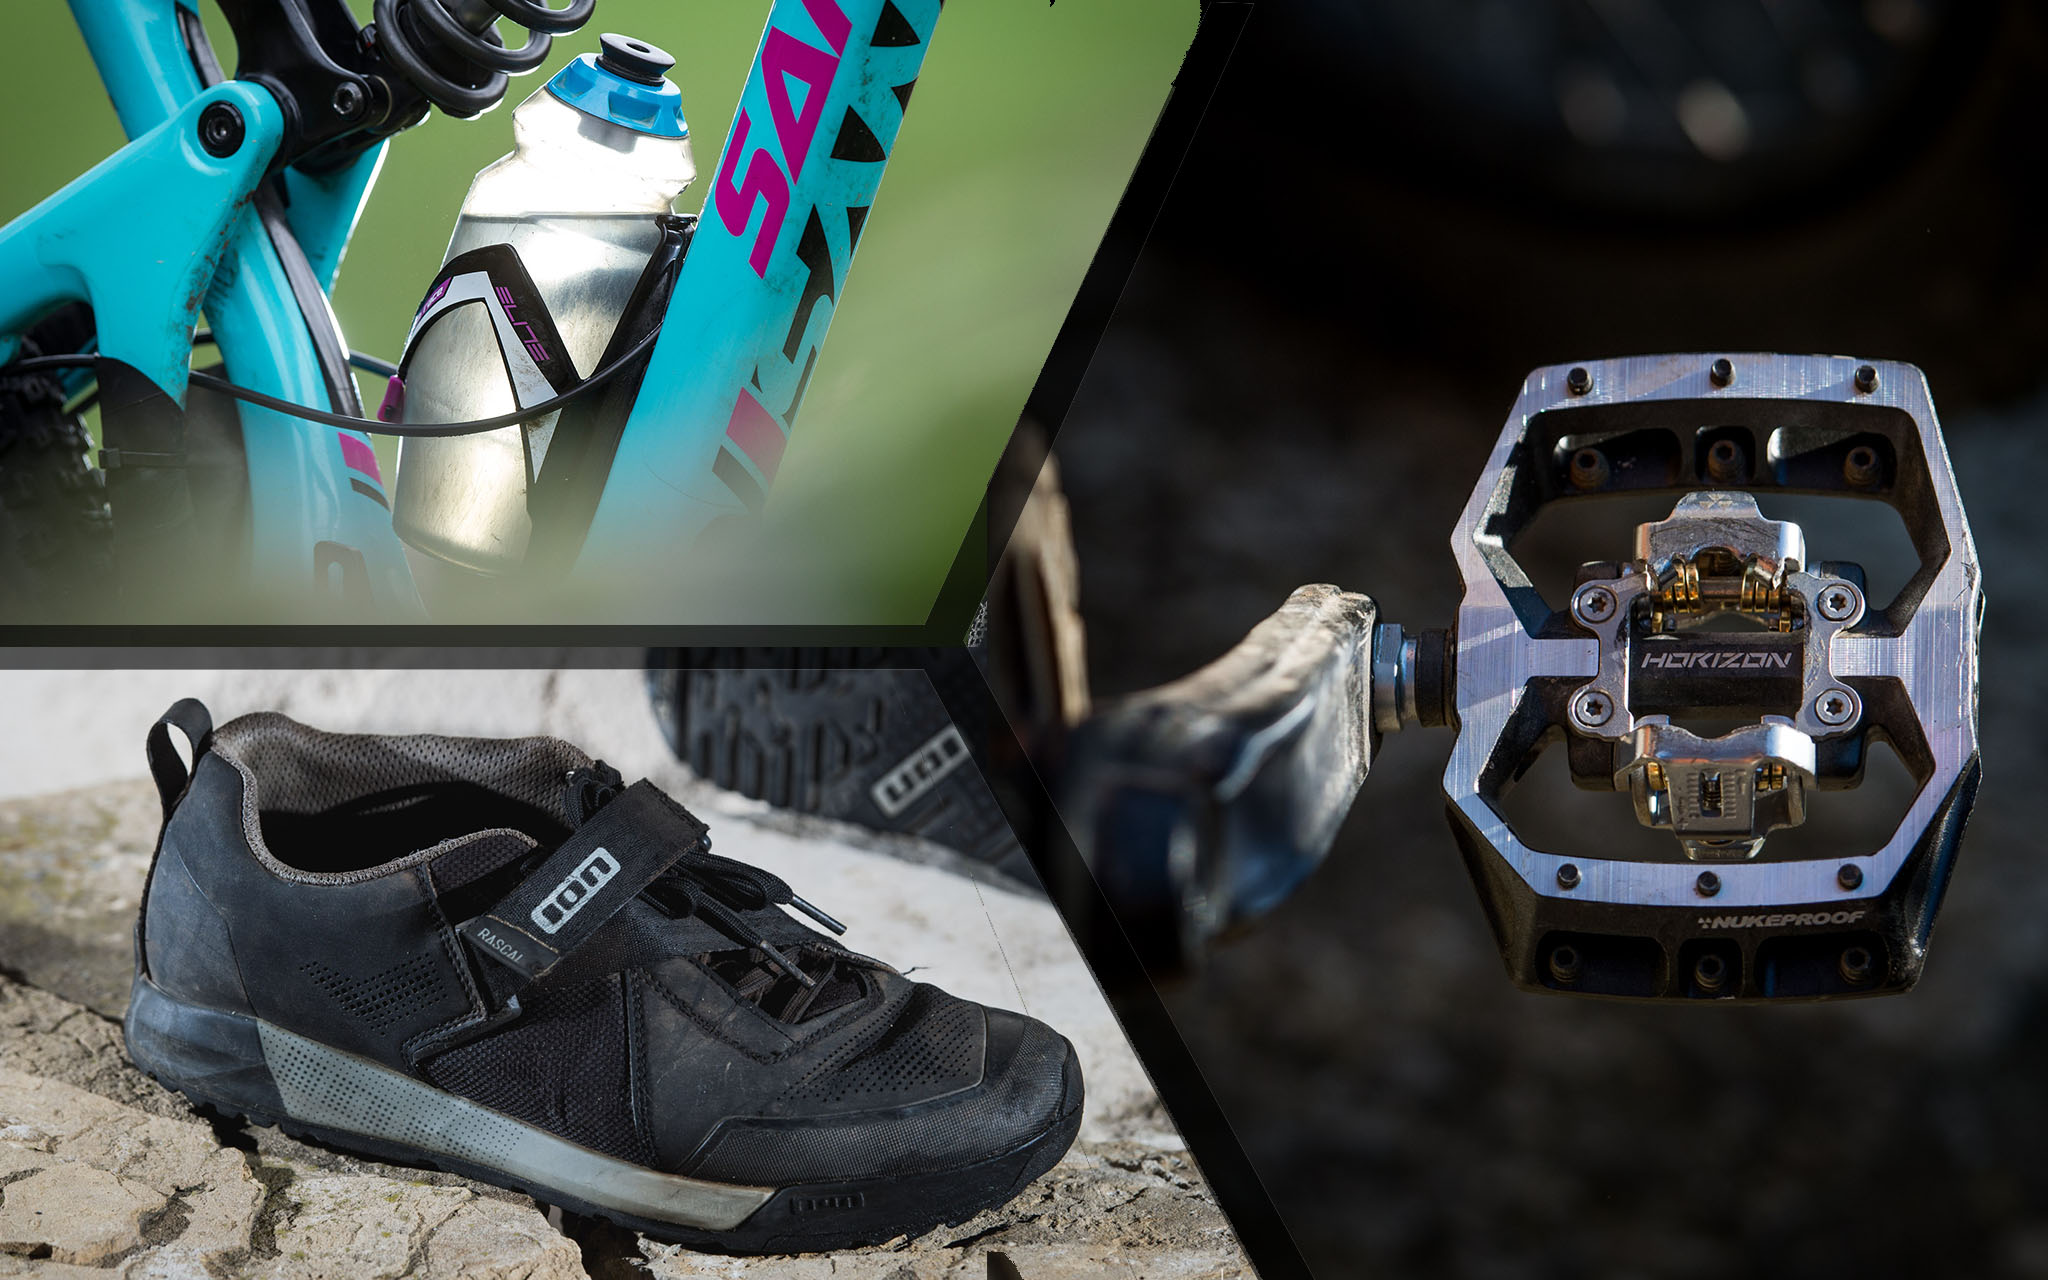 Test Ride #3 : ION / Abloc / Nukeproof - Test-Ride : Chaussures ION Rascal